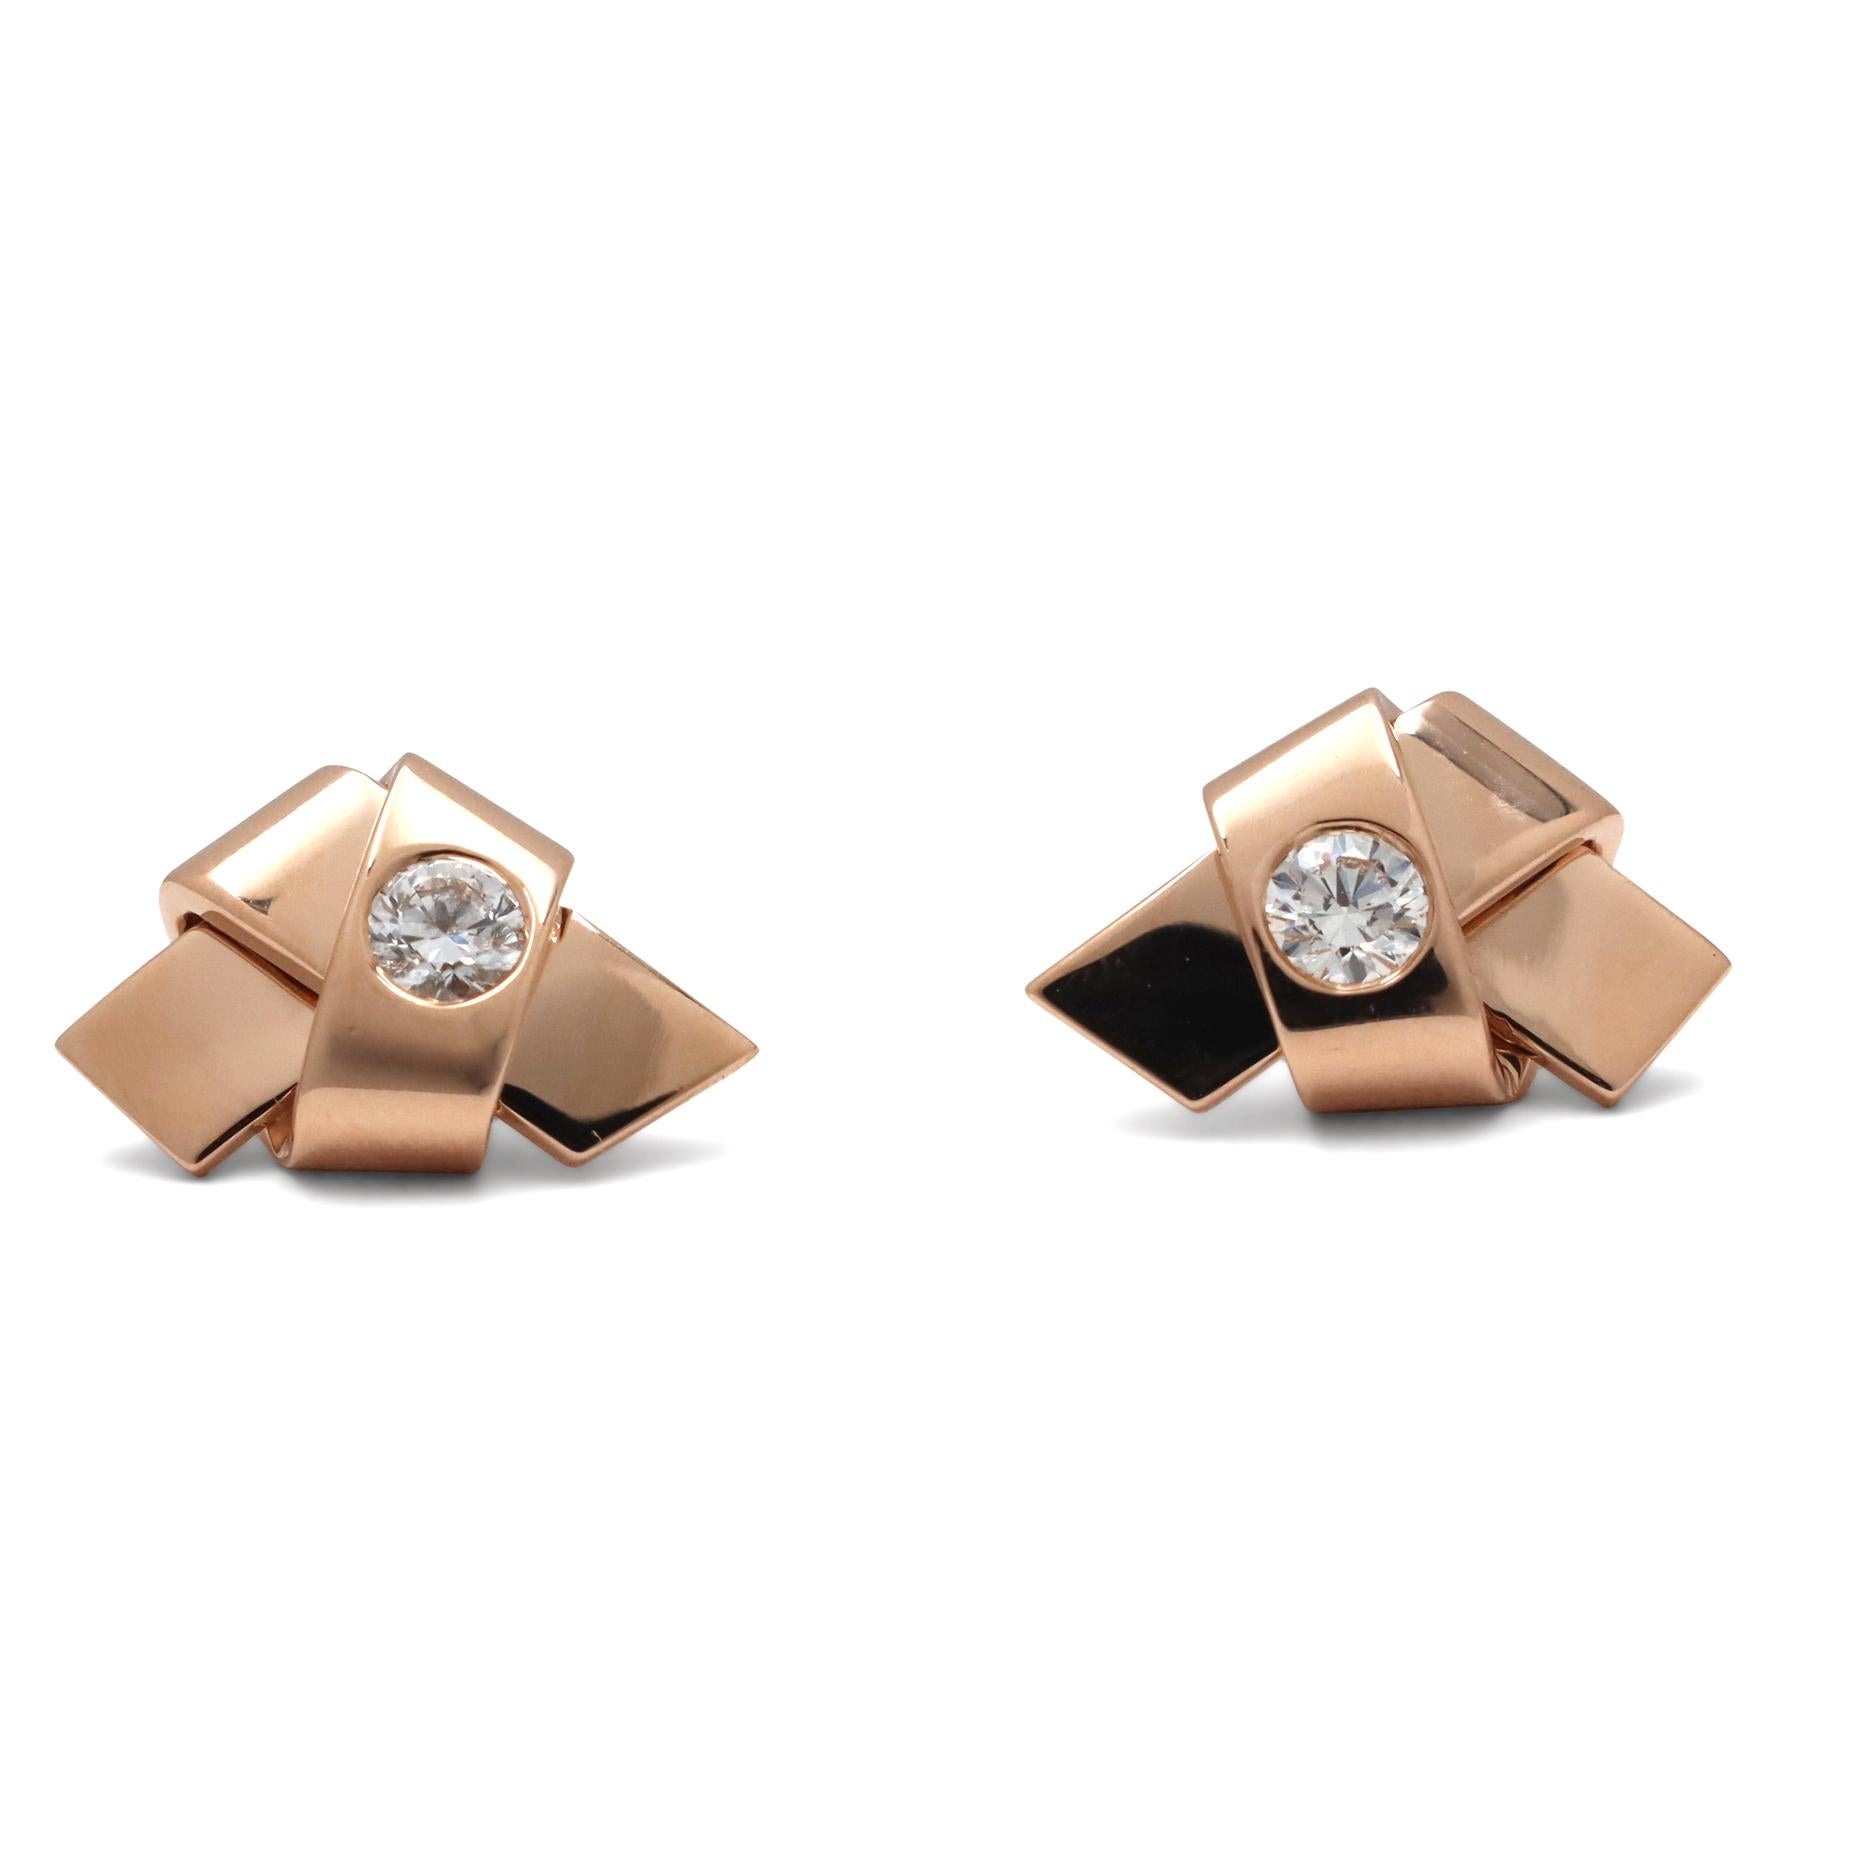 Authentic Cartier 'Ribbon Knot' earrings crafted in 18 karat rose gold featuring two round brilliant cut diamonds weighing an estimated 0.30 total carat weight (G color, VS clarity). Signed Cartier, 750, with serial number and hallmarks. The